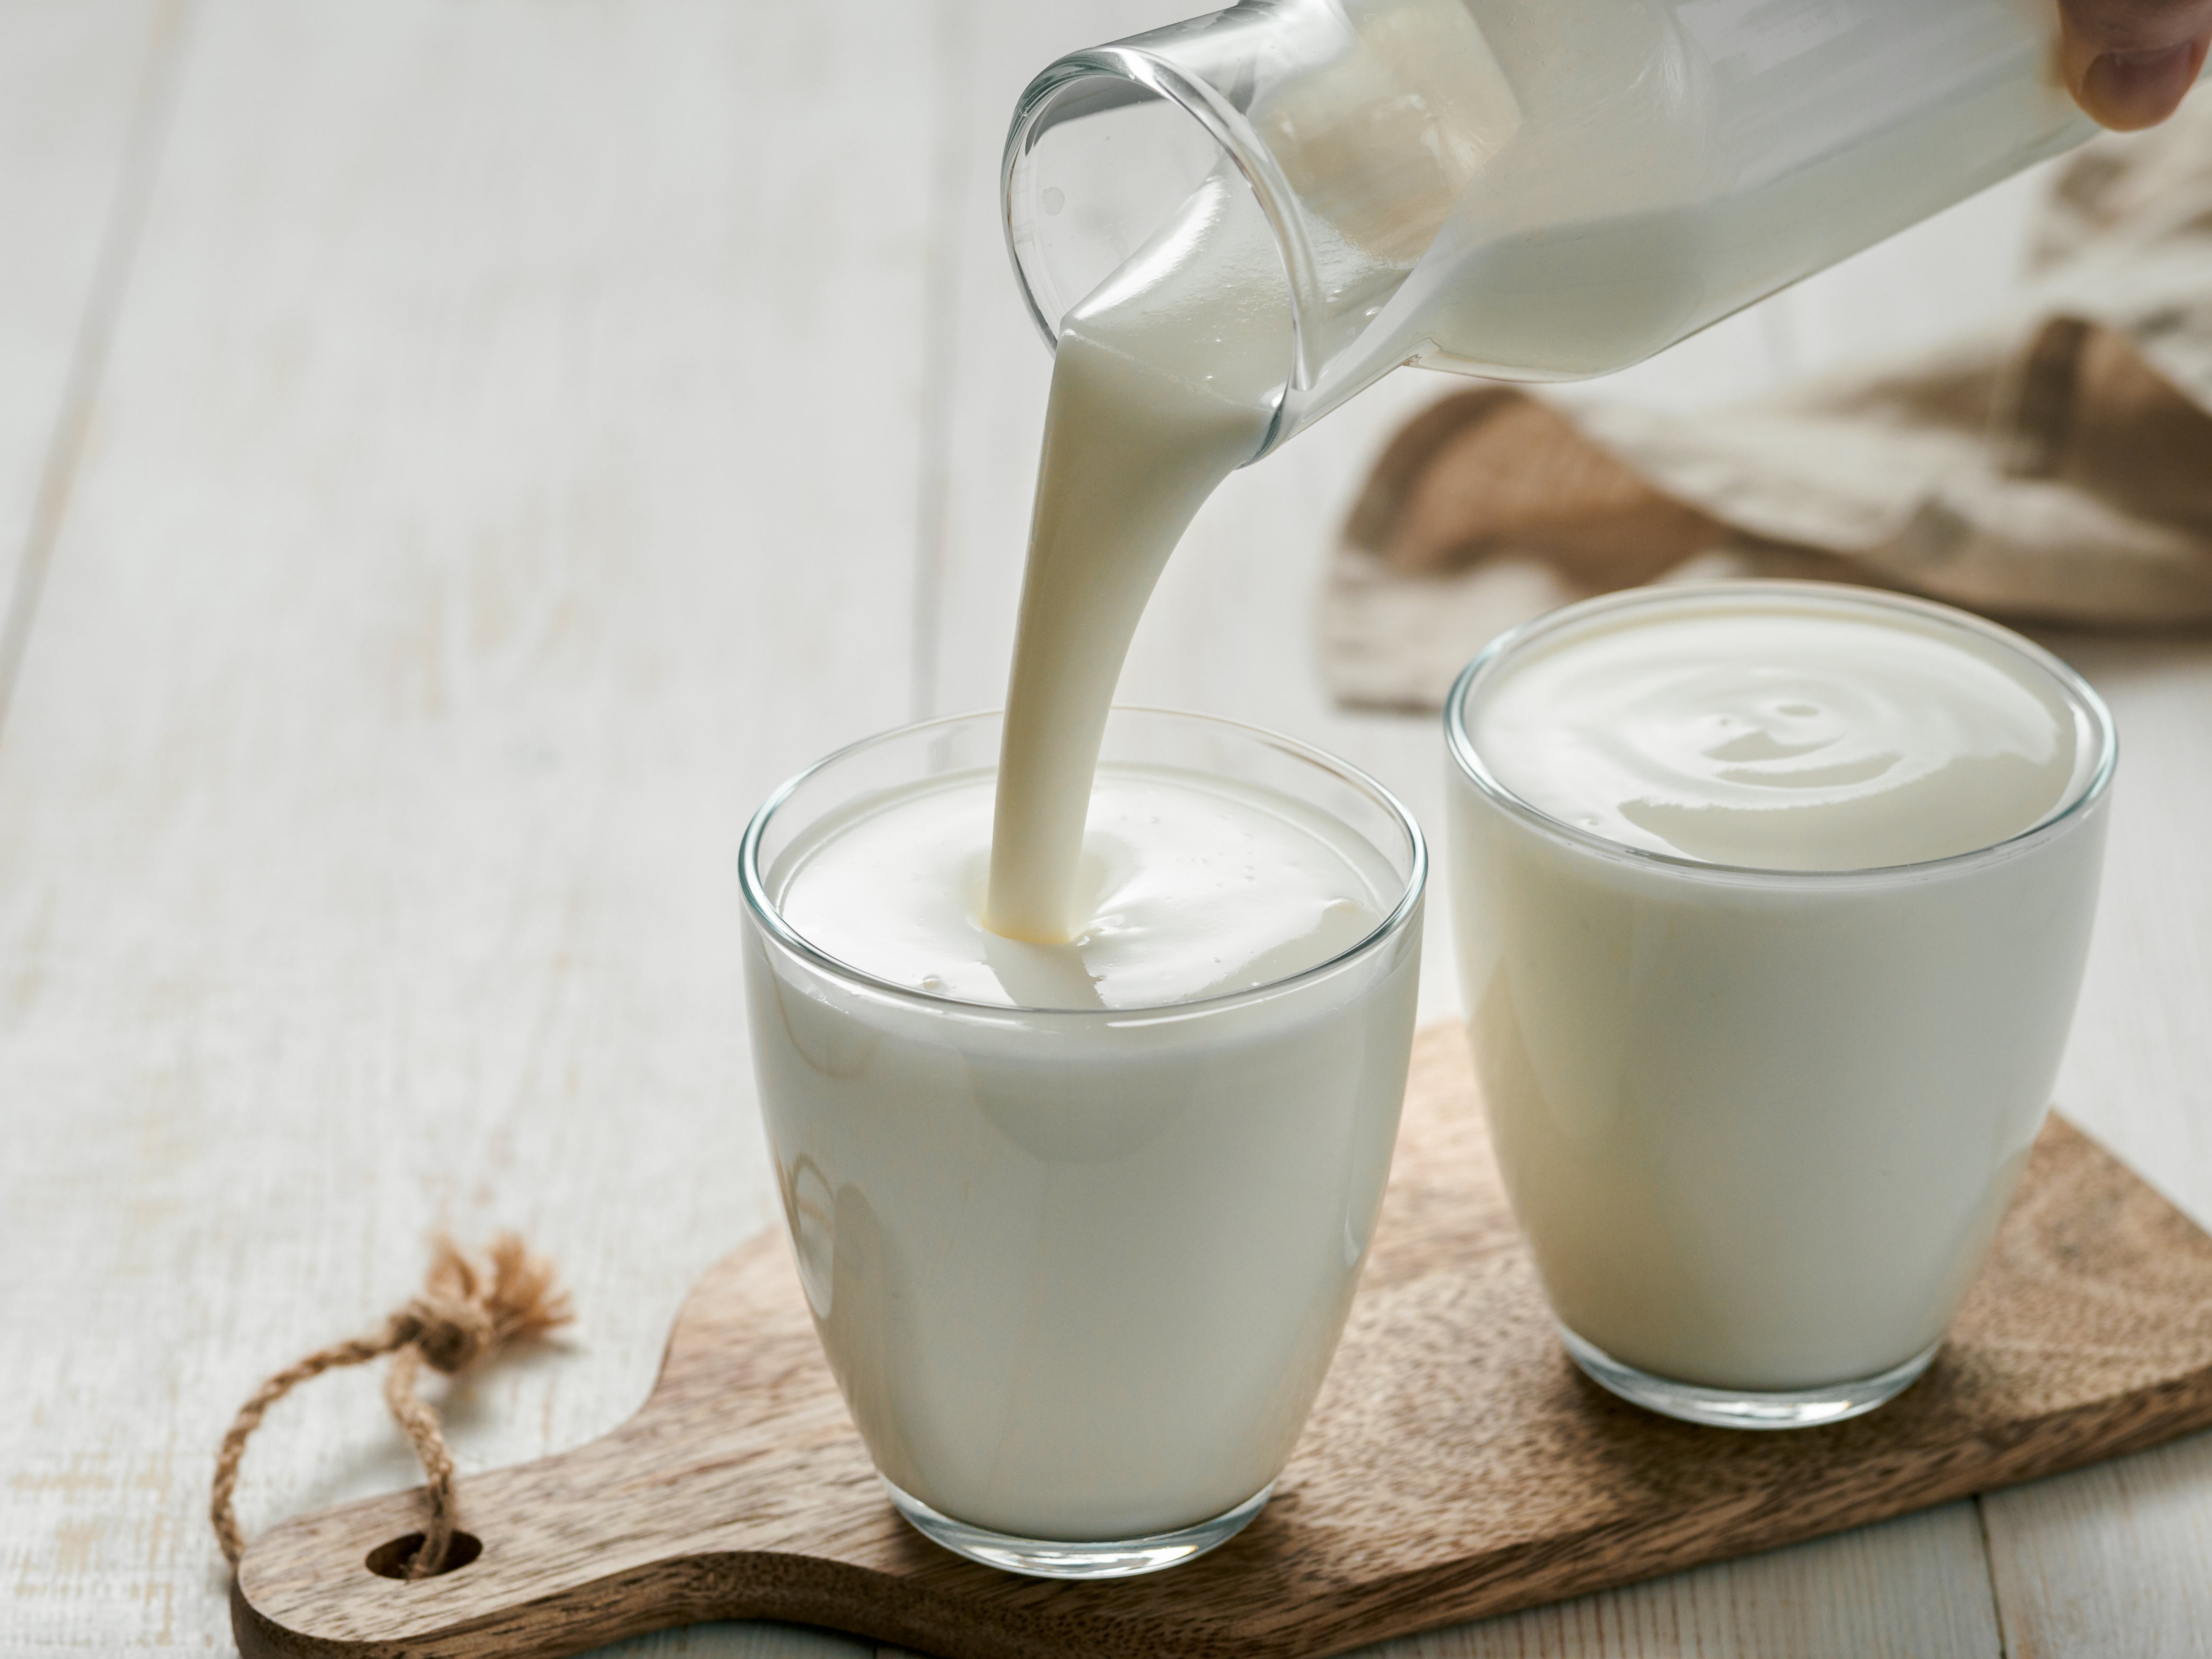 Lamentable lactose: but life has to be easy for it to be sustainable in every sense